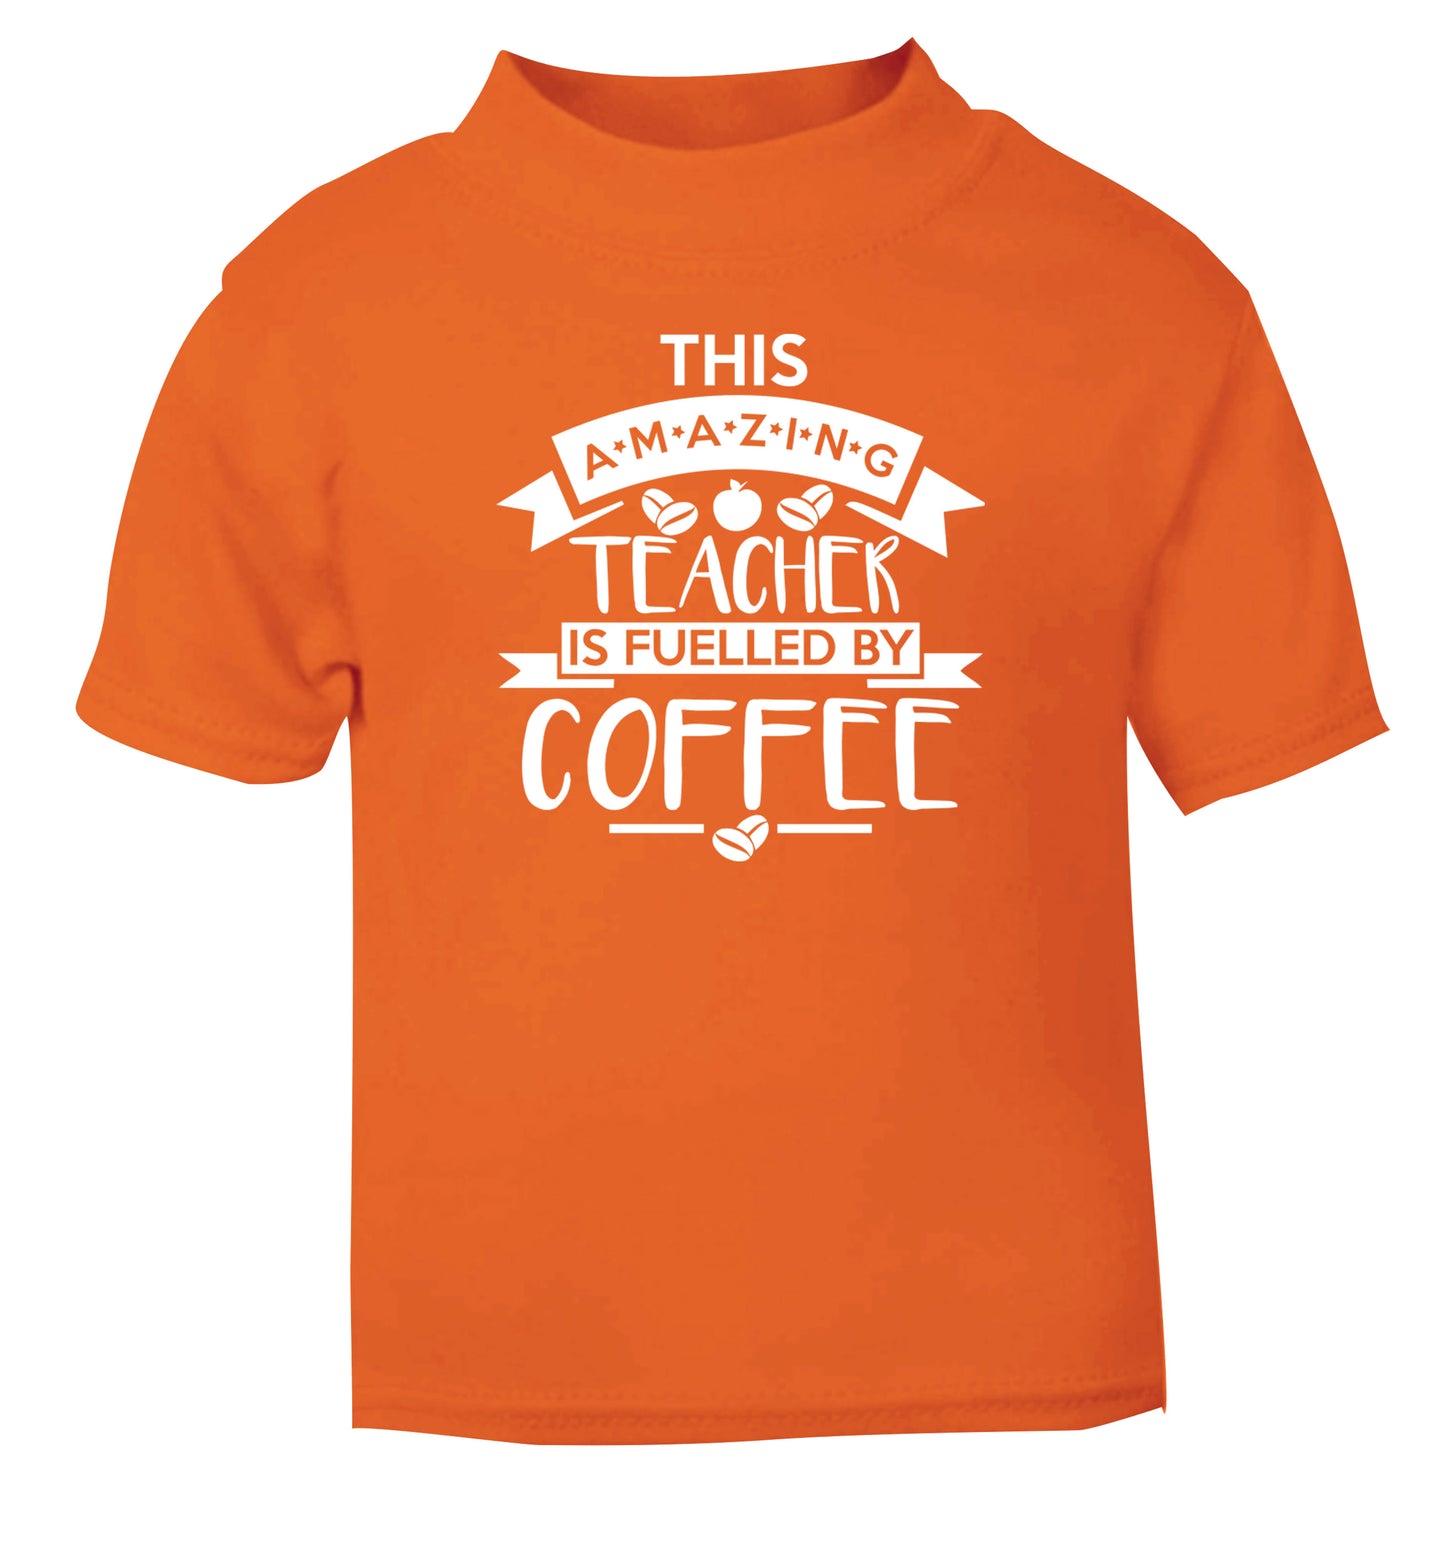 This amazing teacher is fuelled by coffee orange Baby Toddler Tshirt 2 Years